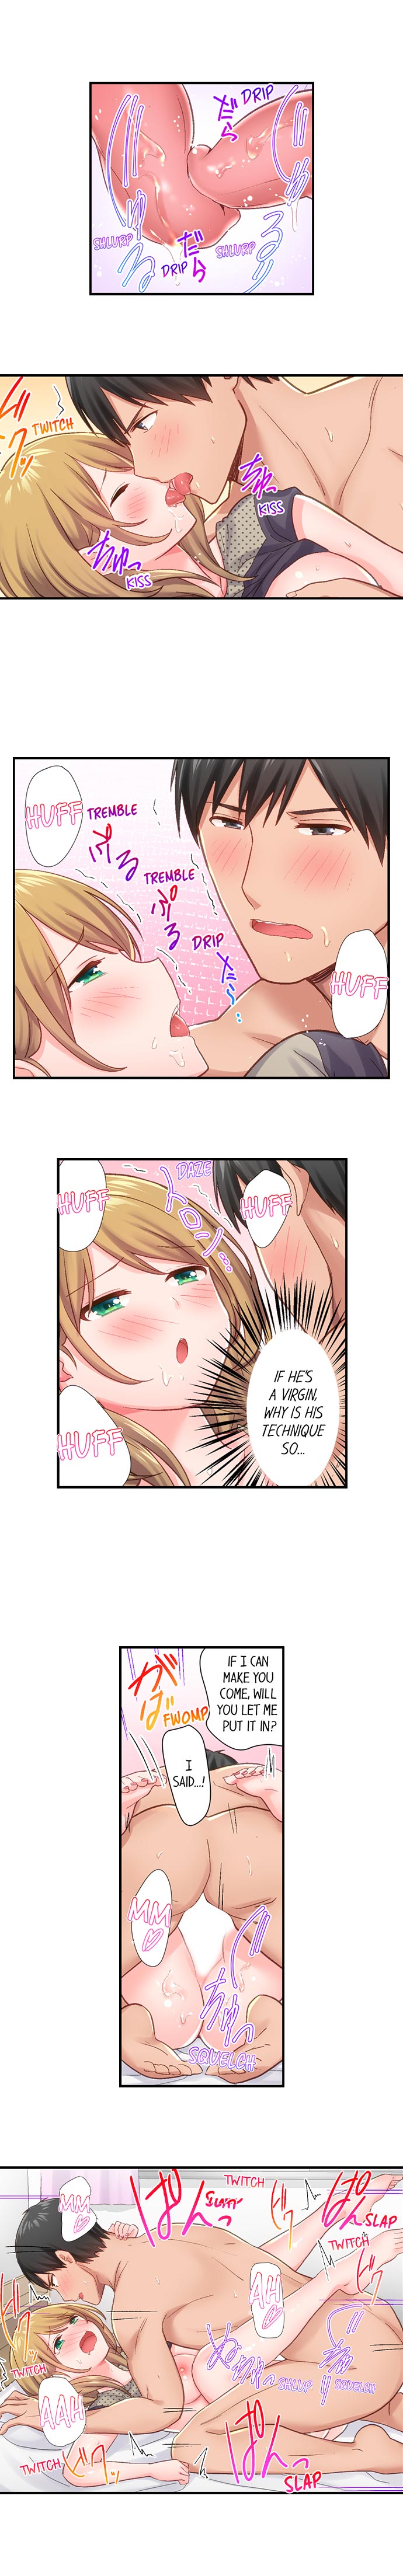 Country Guy Wants to Become a Sex Master in Tokyo - Chapter 3 Page 7